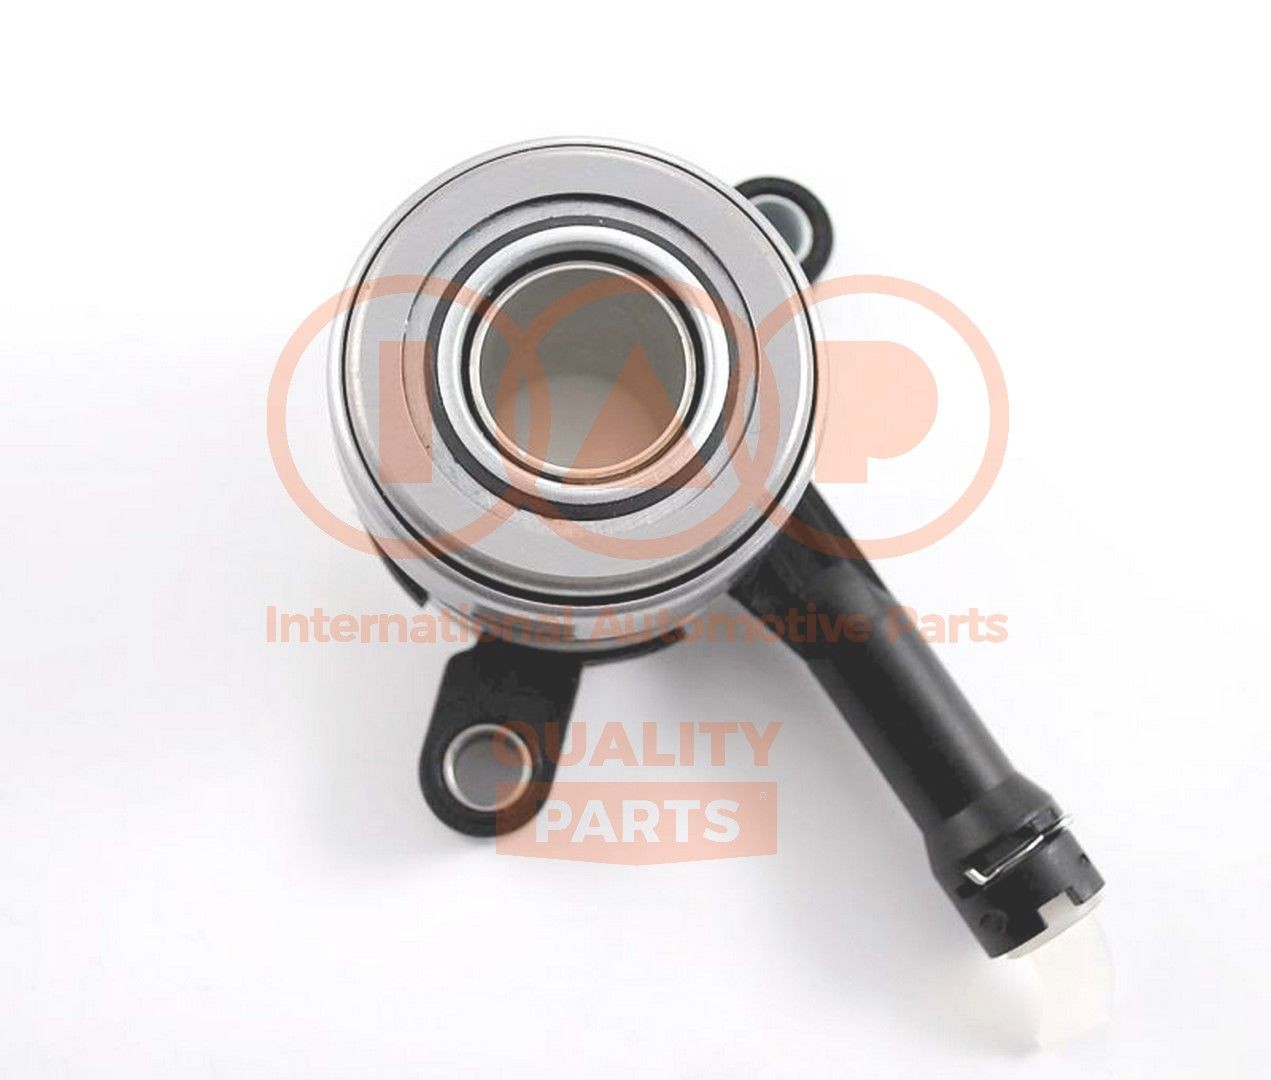 IAP QUALITY PARTS 204-13161 RENAULT MASTER 2008 Clutch thrust bearing